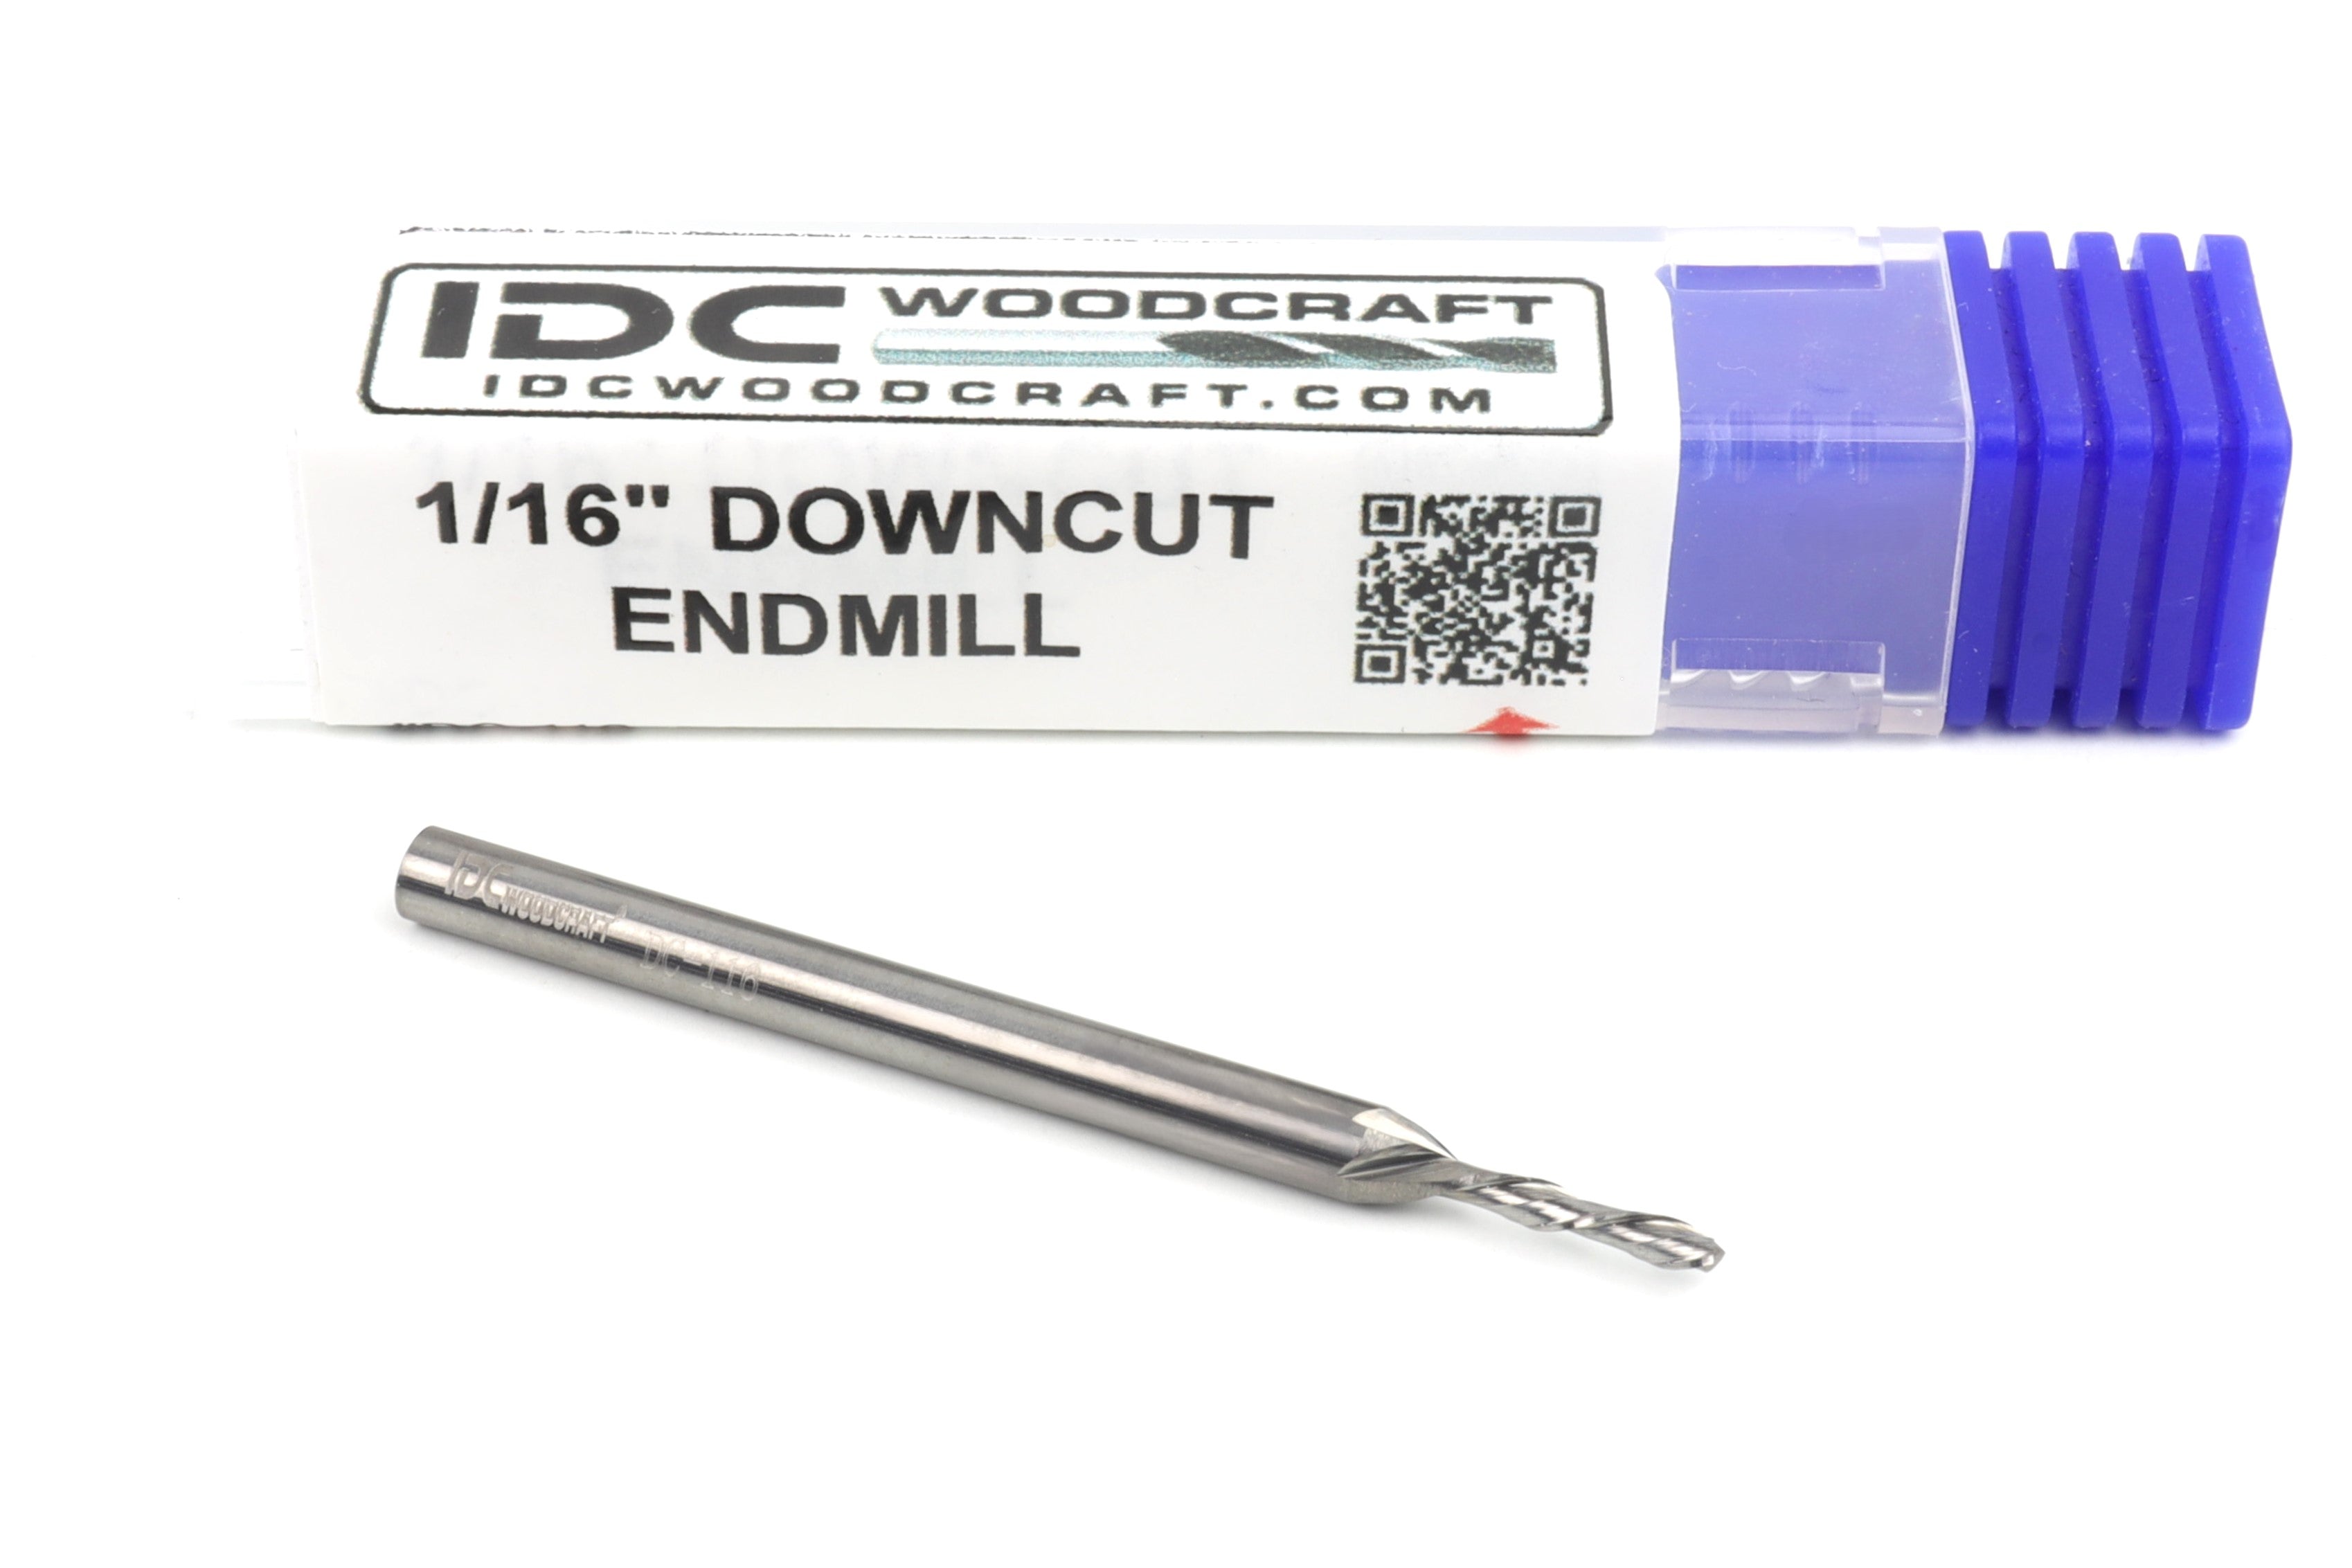 1/16 Down Cut Endmill Bit For CNC Routers for Fine Detail Carving, 1/8 Shank